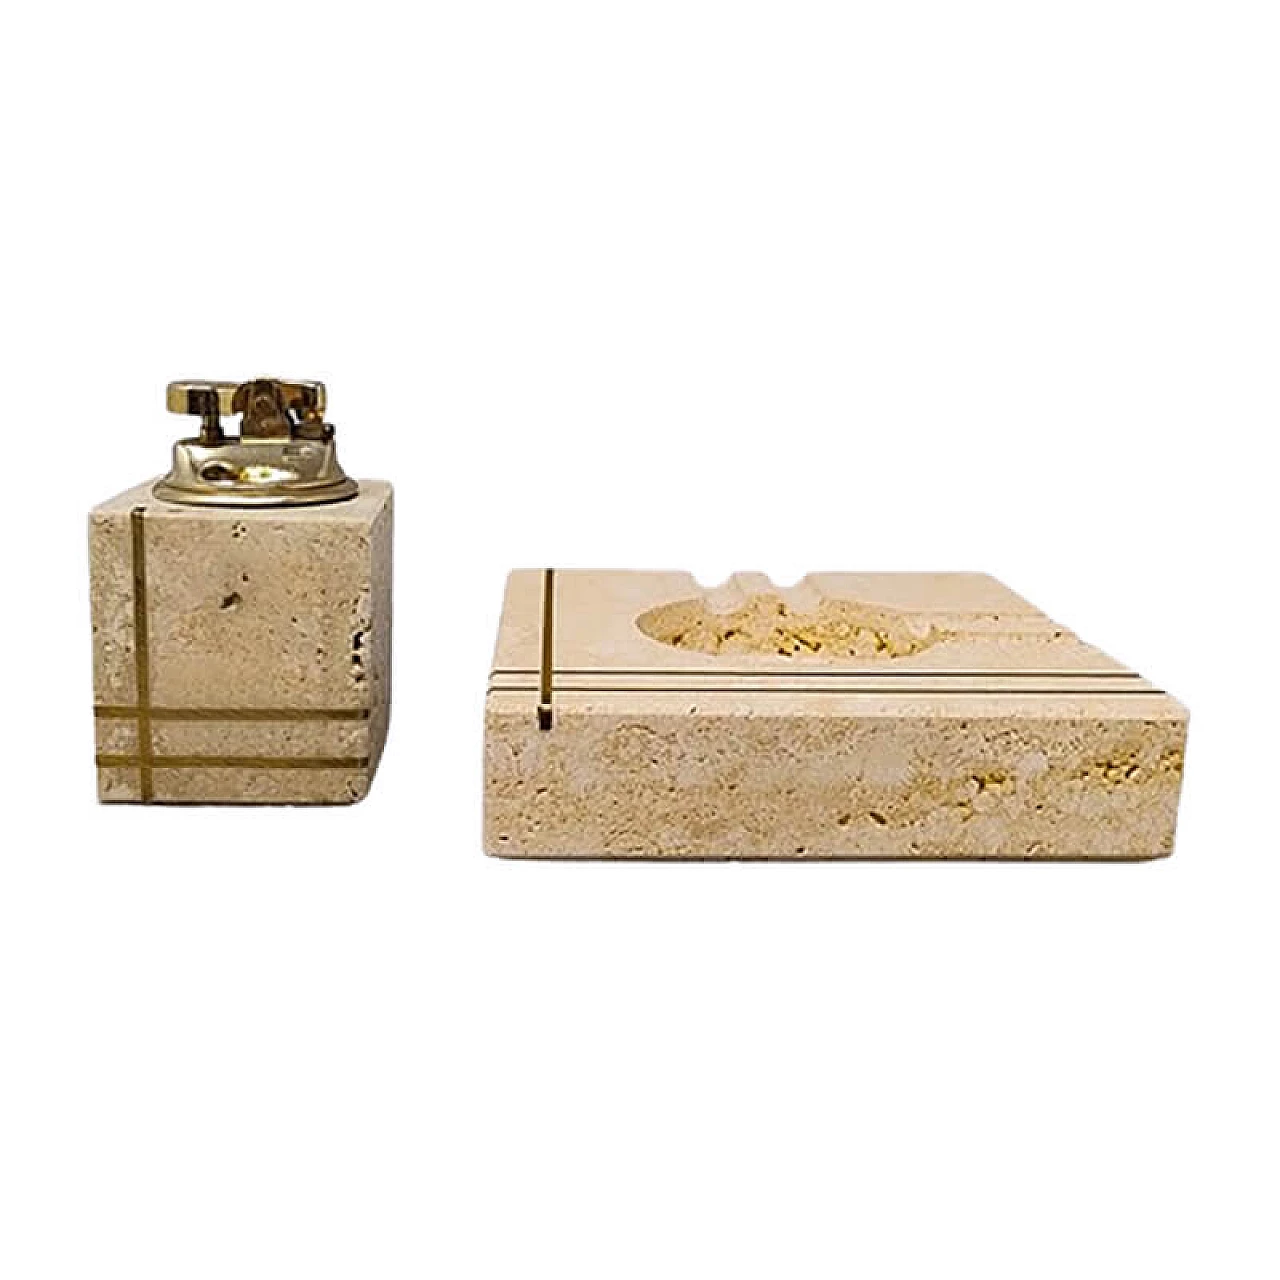 Travertine ashtray and lighter by Enzo Mari for F.lli Mannelli, 1970s 1